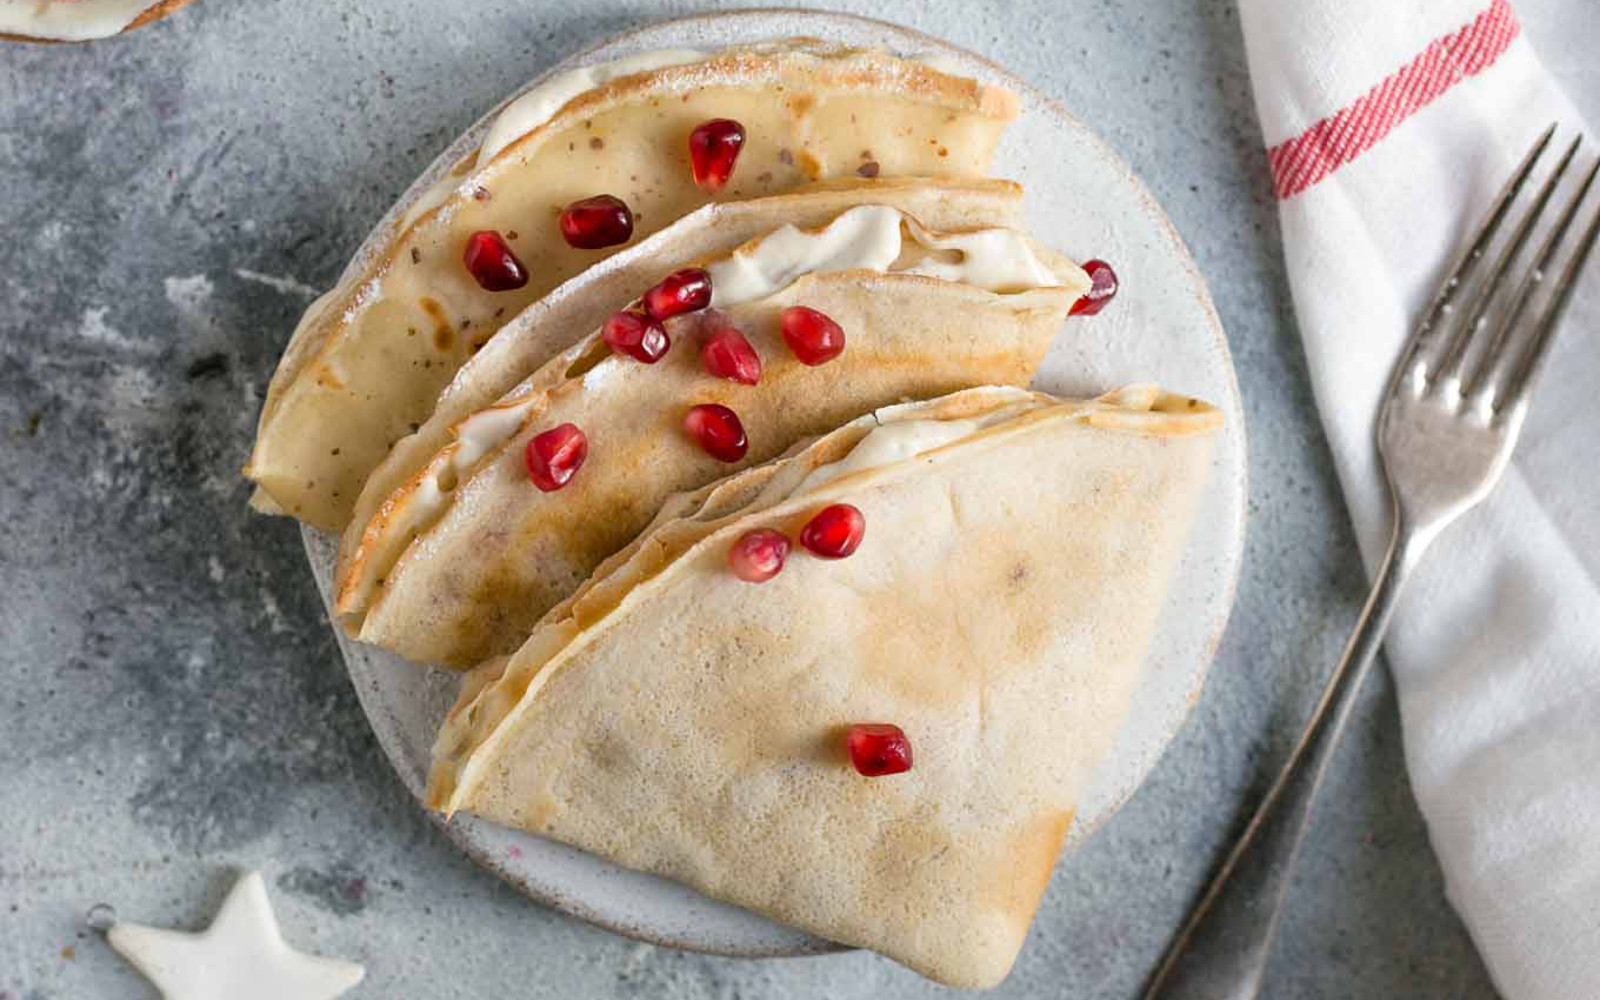 Vegan Classic French Crepes with pomegranate seeds with cashew cream